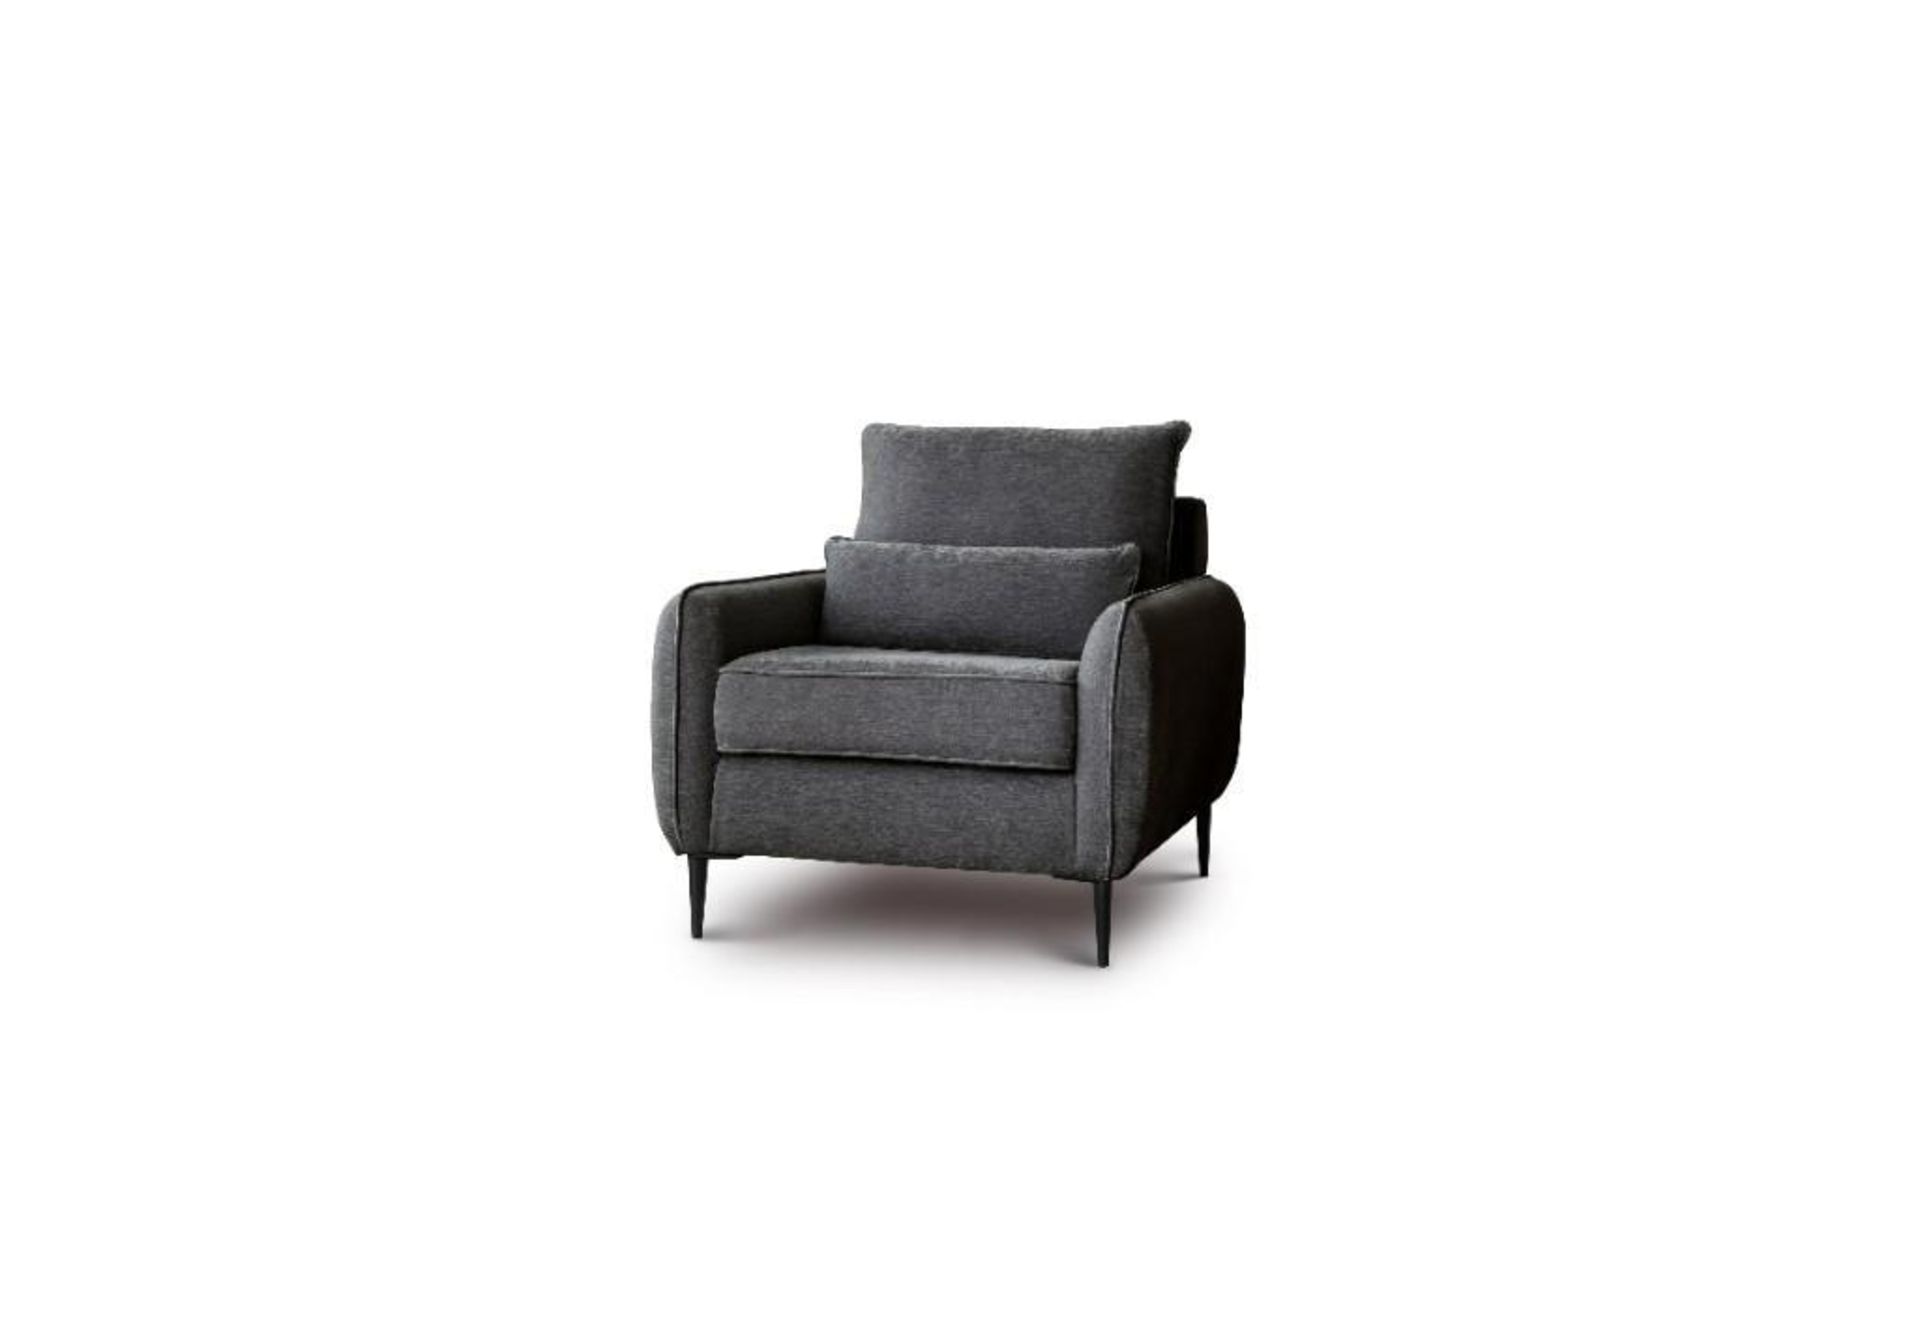 Brand new Boxed Rhonda Upholstered Armchair in Charcoal - Image 3 of 3